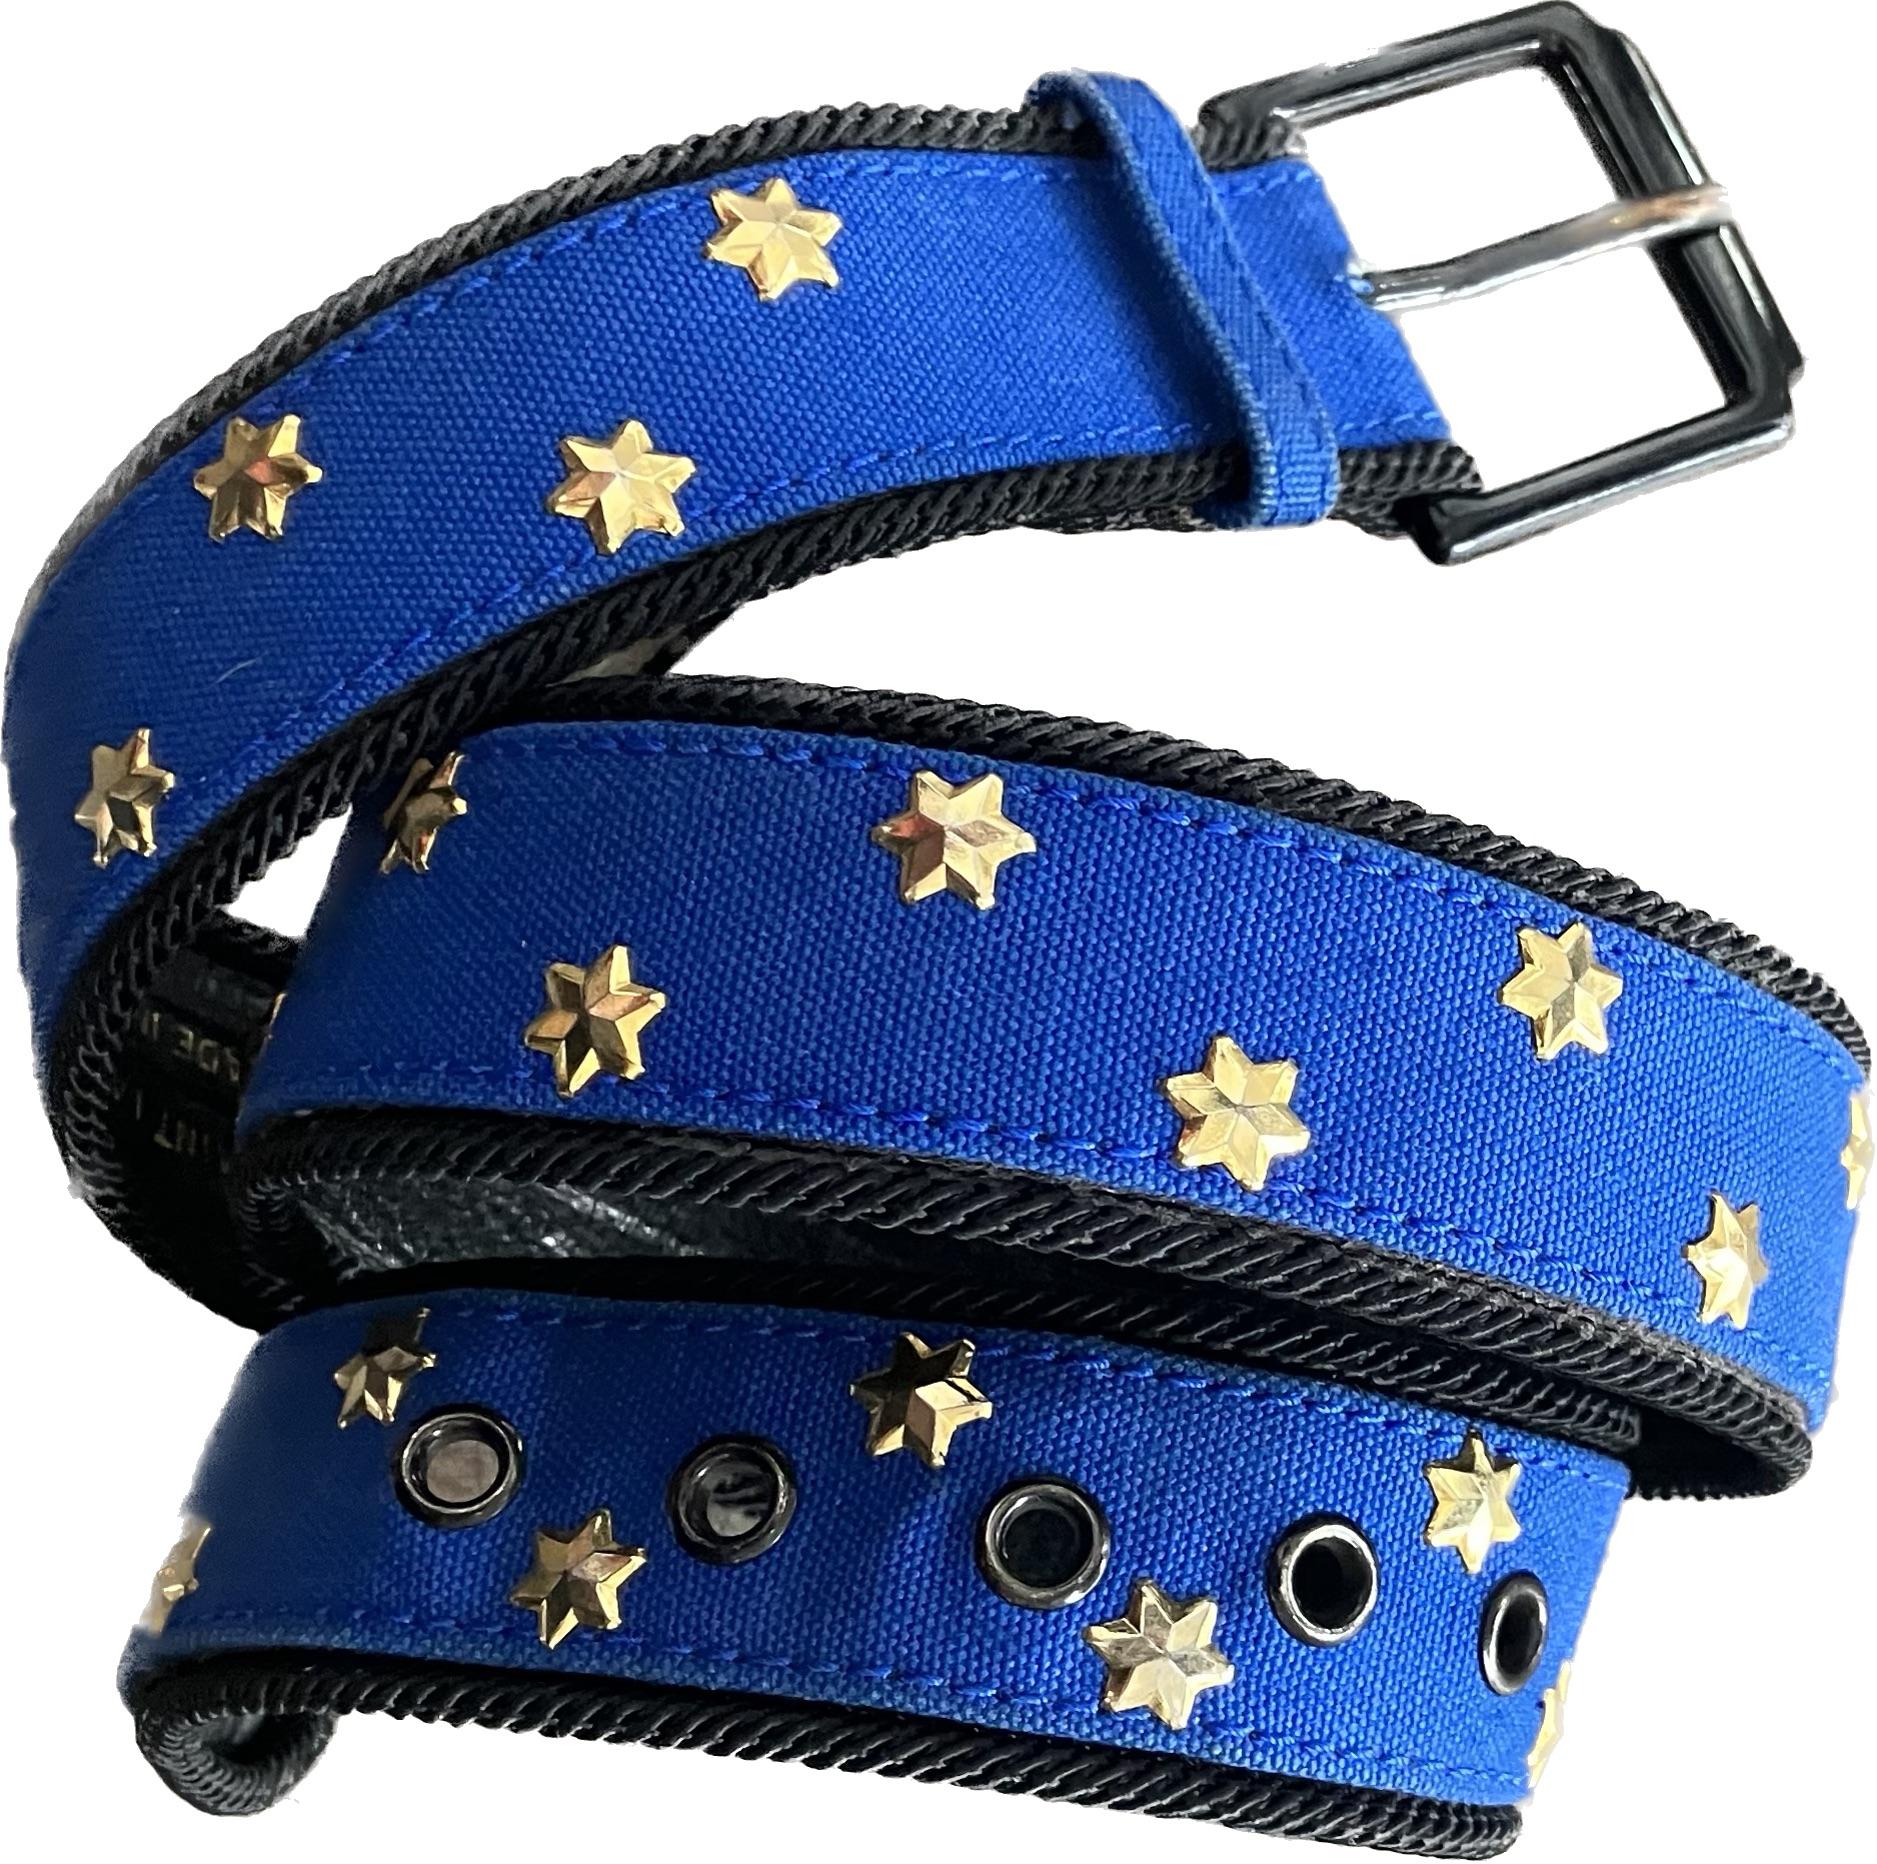 Blue Yves Saint Laurent YSL braided belt featuring blue cotton band, gold-ton stars on a black braided outline, inside black leather, an inside gold-tone stamp. 
Inside size stamp: 2
In good vintage condition. Made in France. 
Maxi Length (with